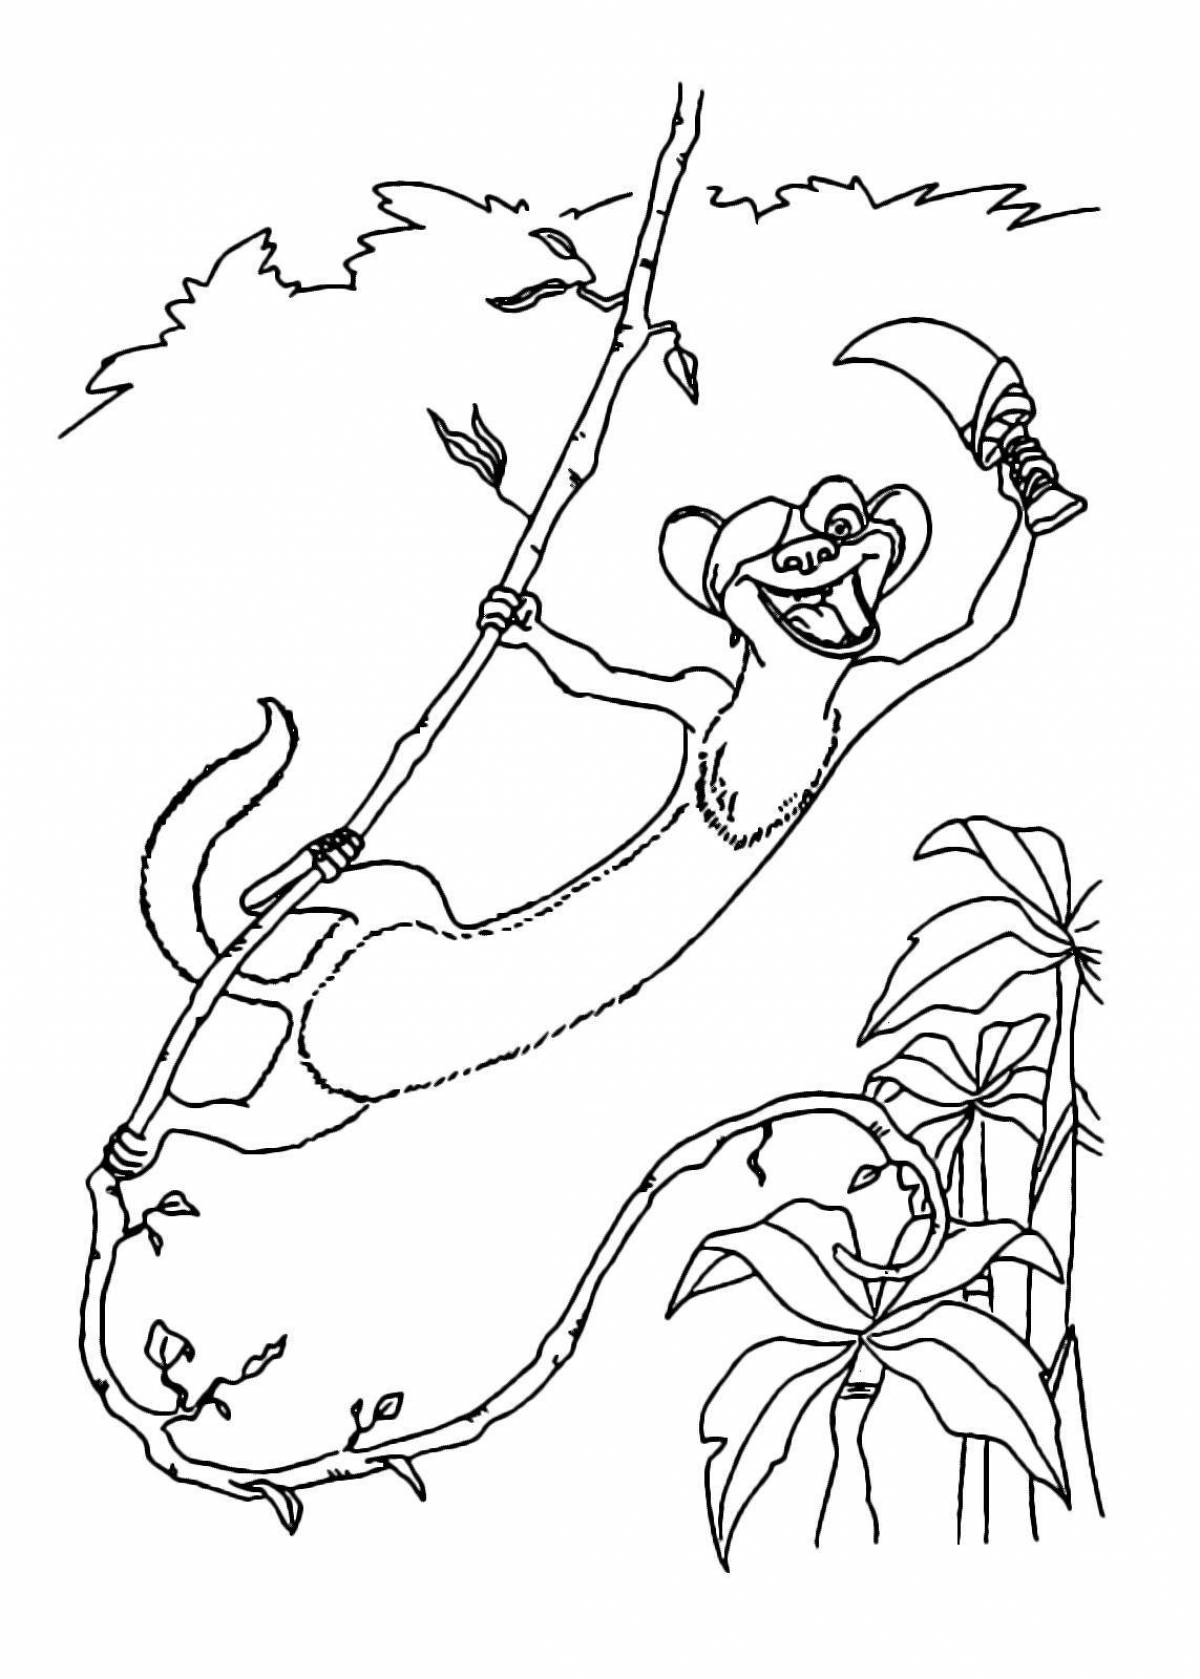 Fancy Tank Ice Age coloring page